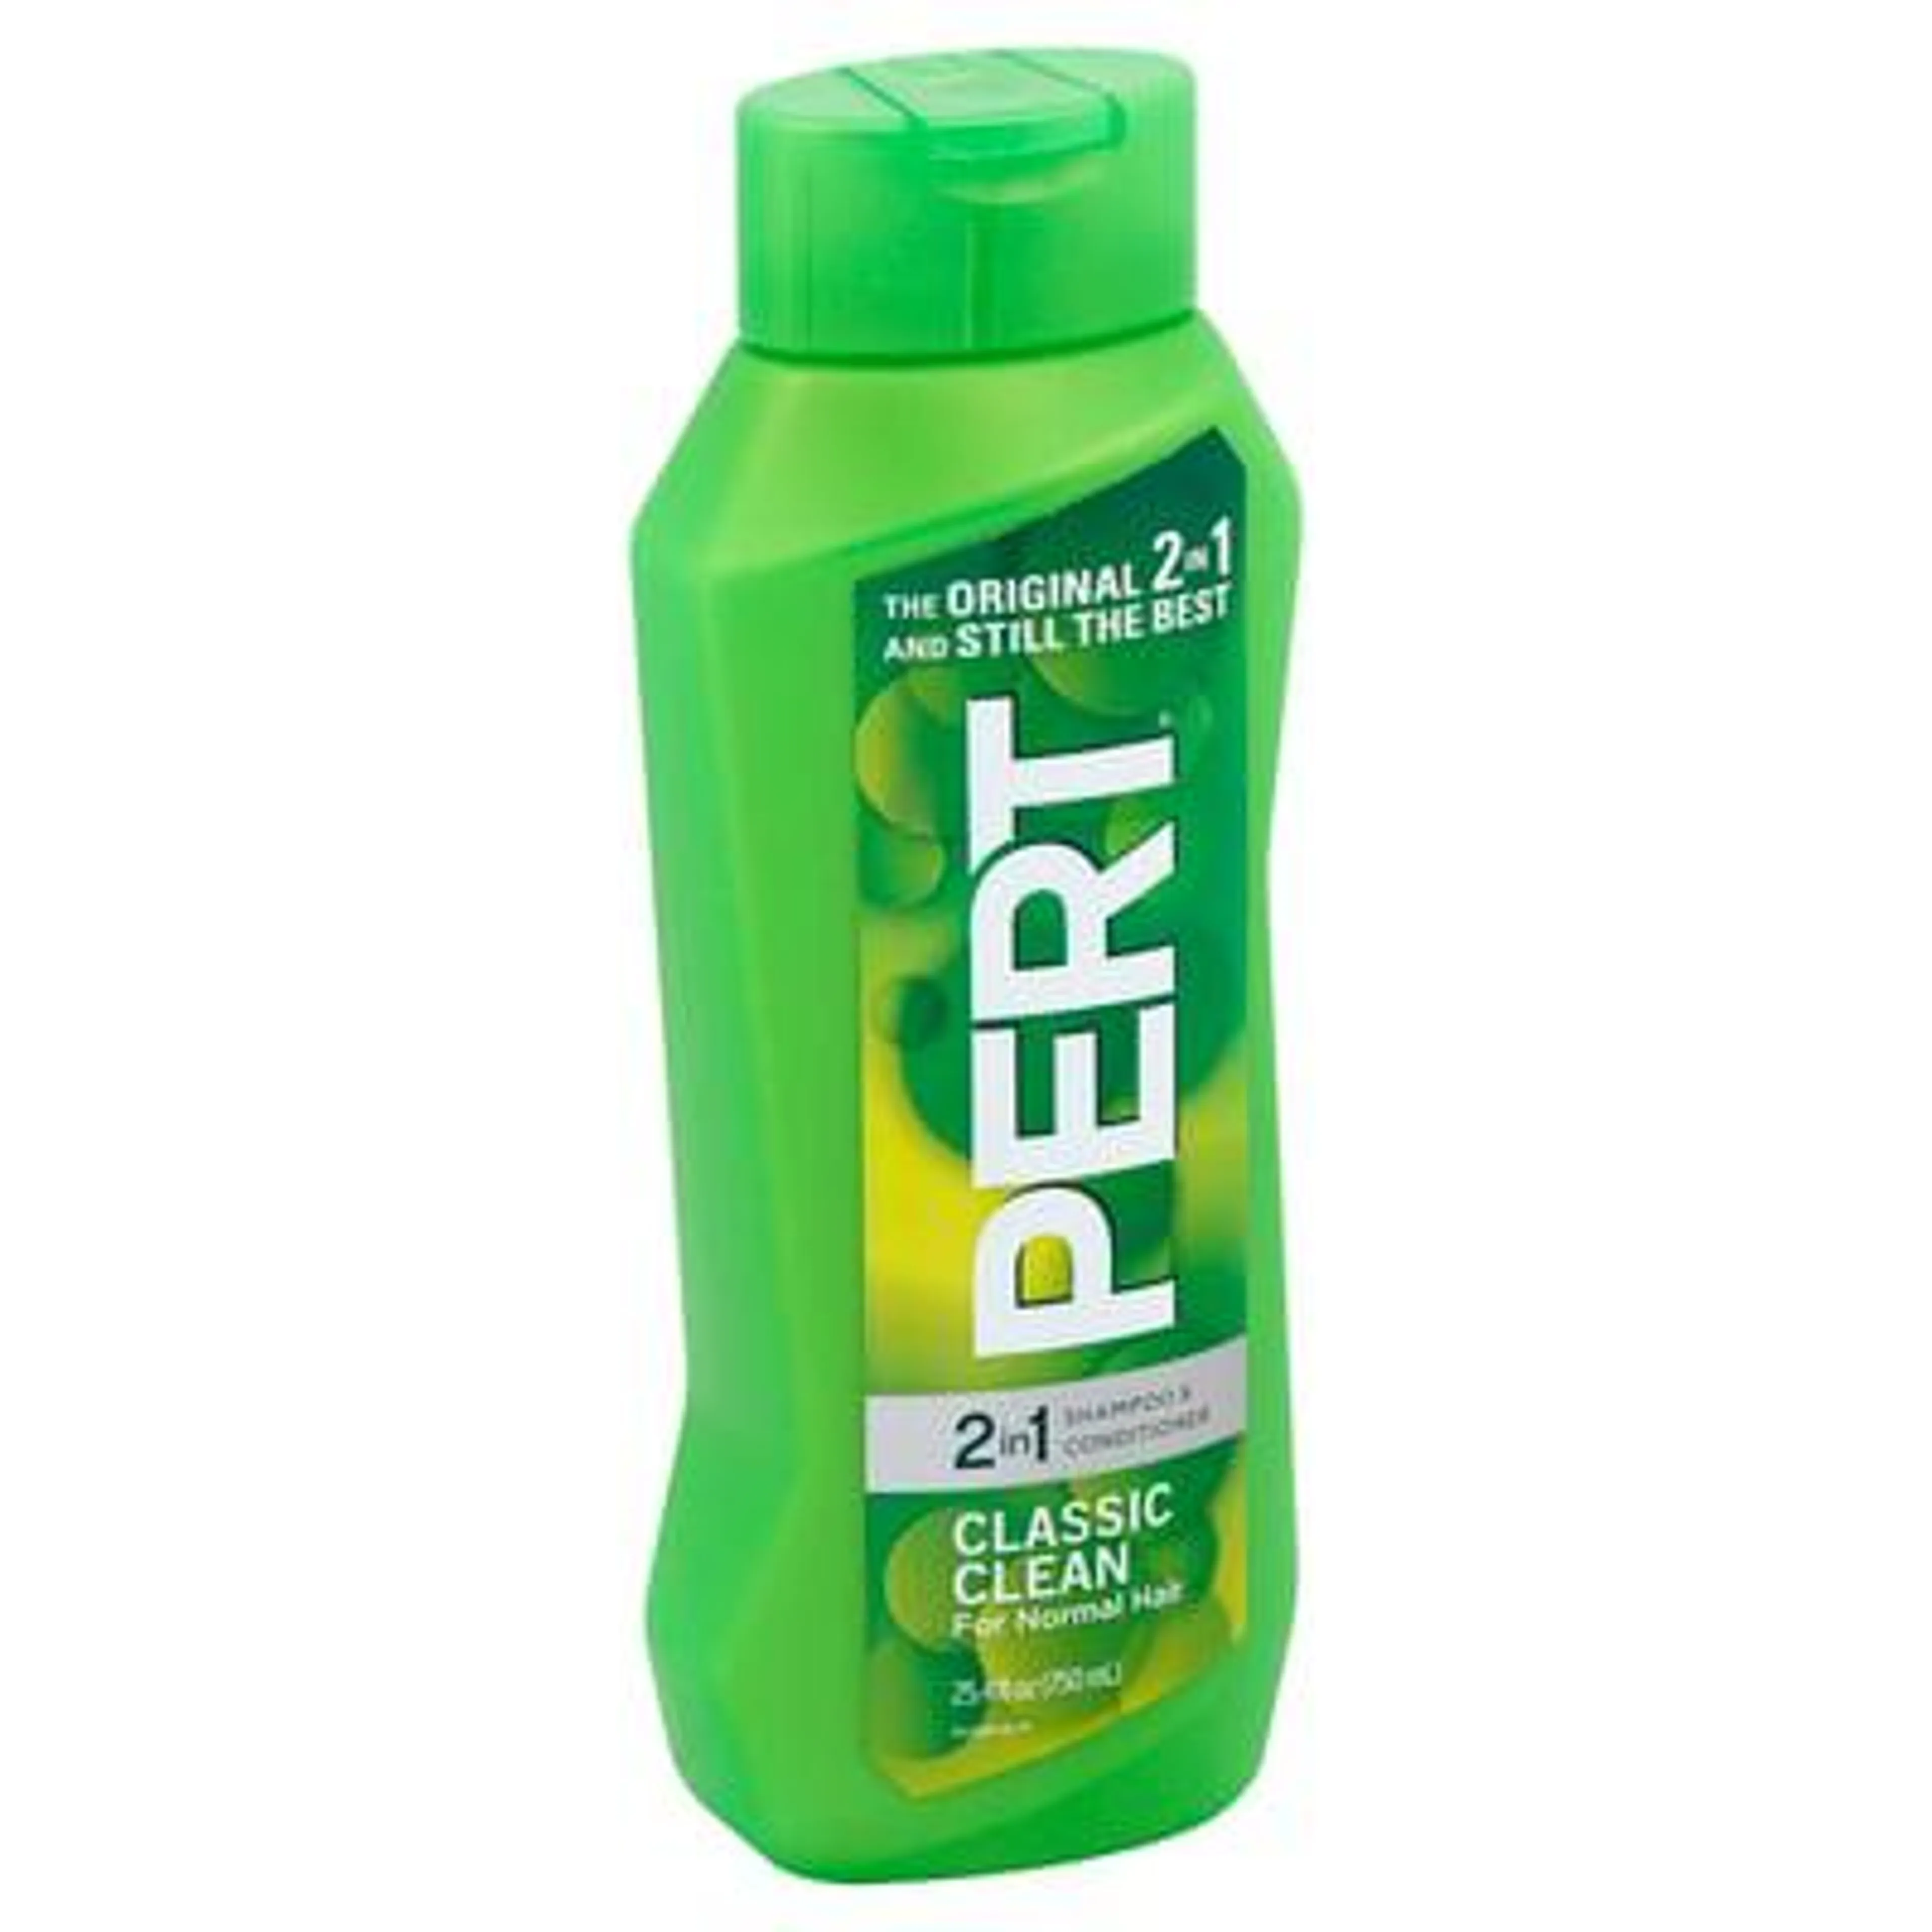 Pert, Shampoo & Conditioner, 2 in 1, Classic Clean, for Normal Hair